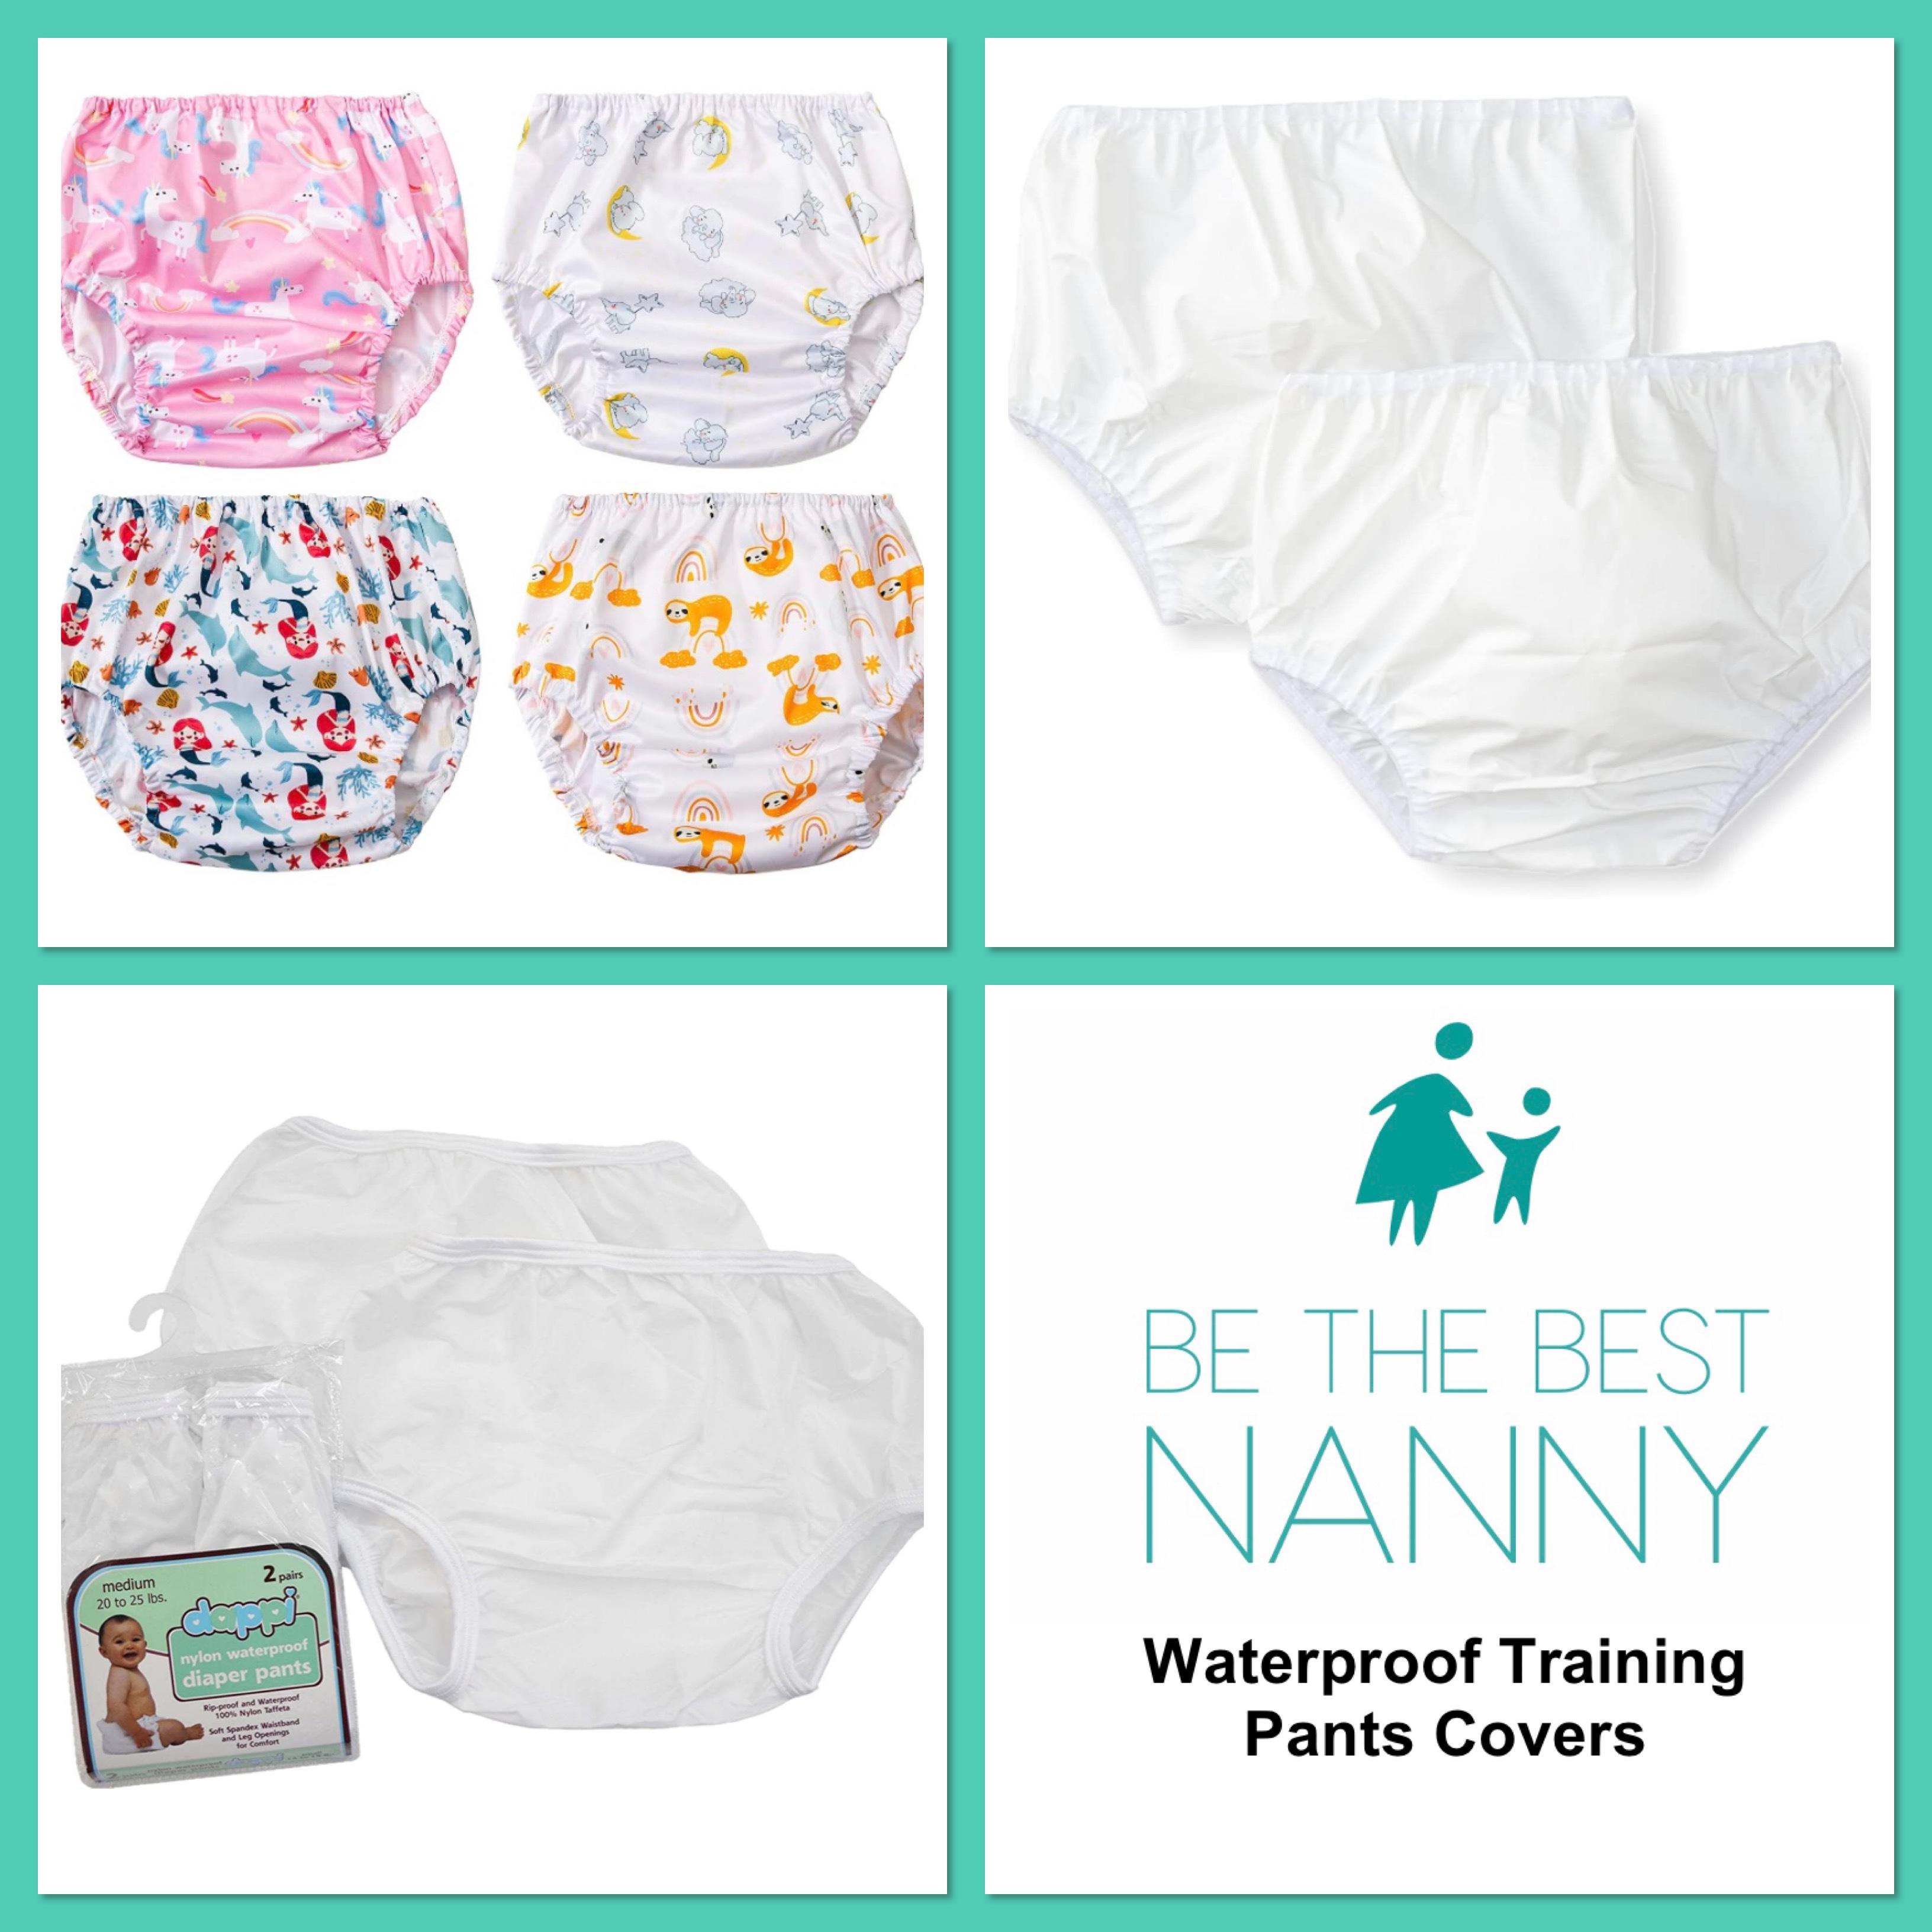 Why You Shouldn't Use Disposable Training Pants for Potty Training